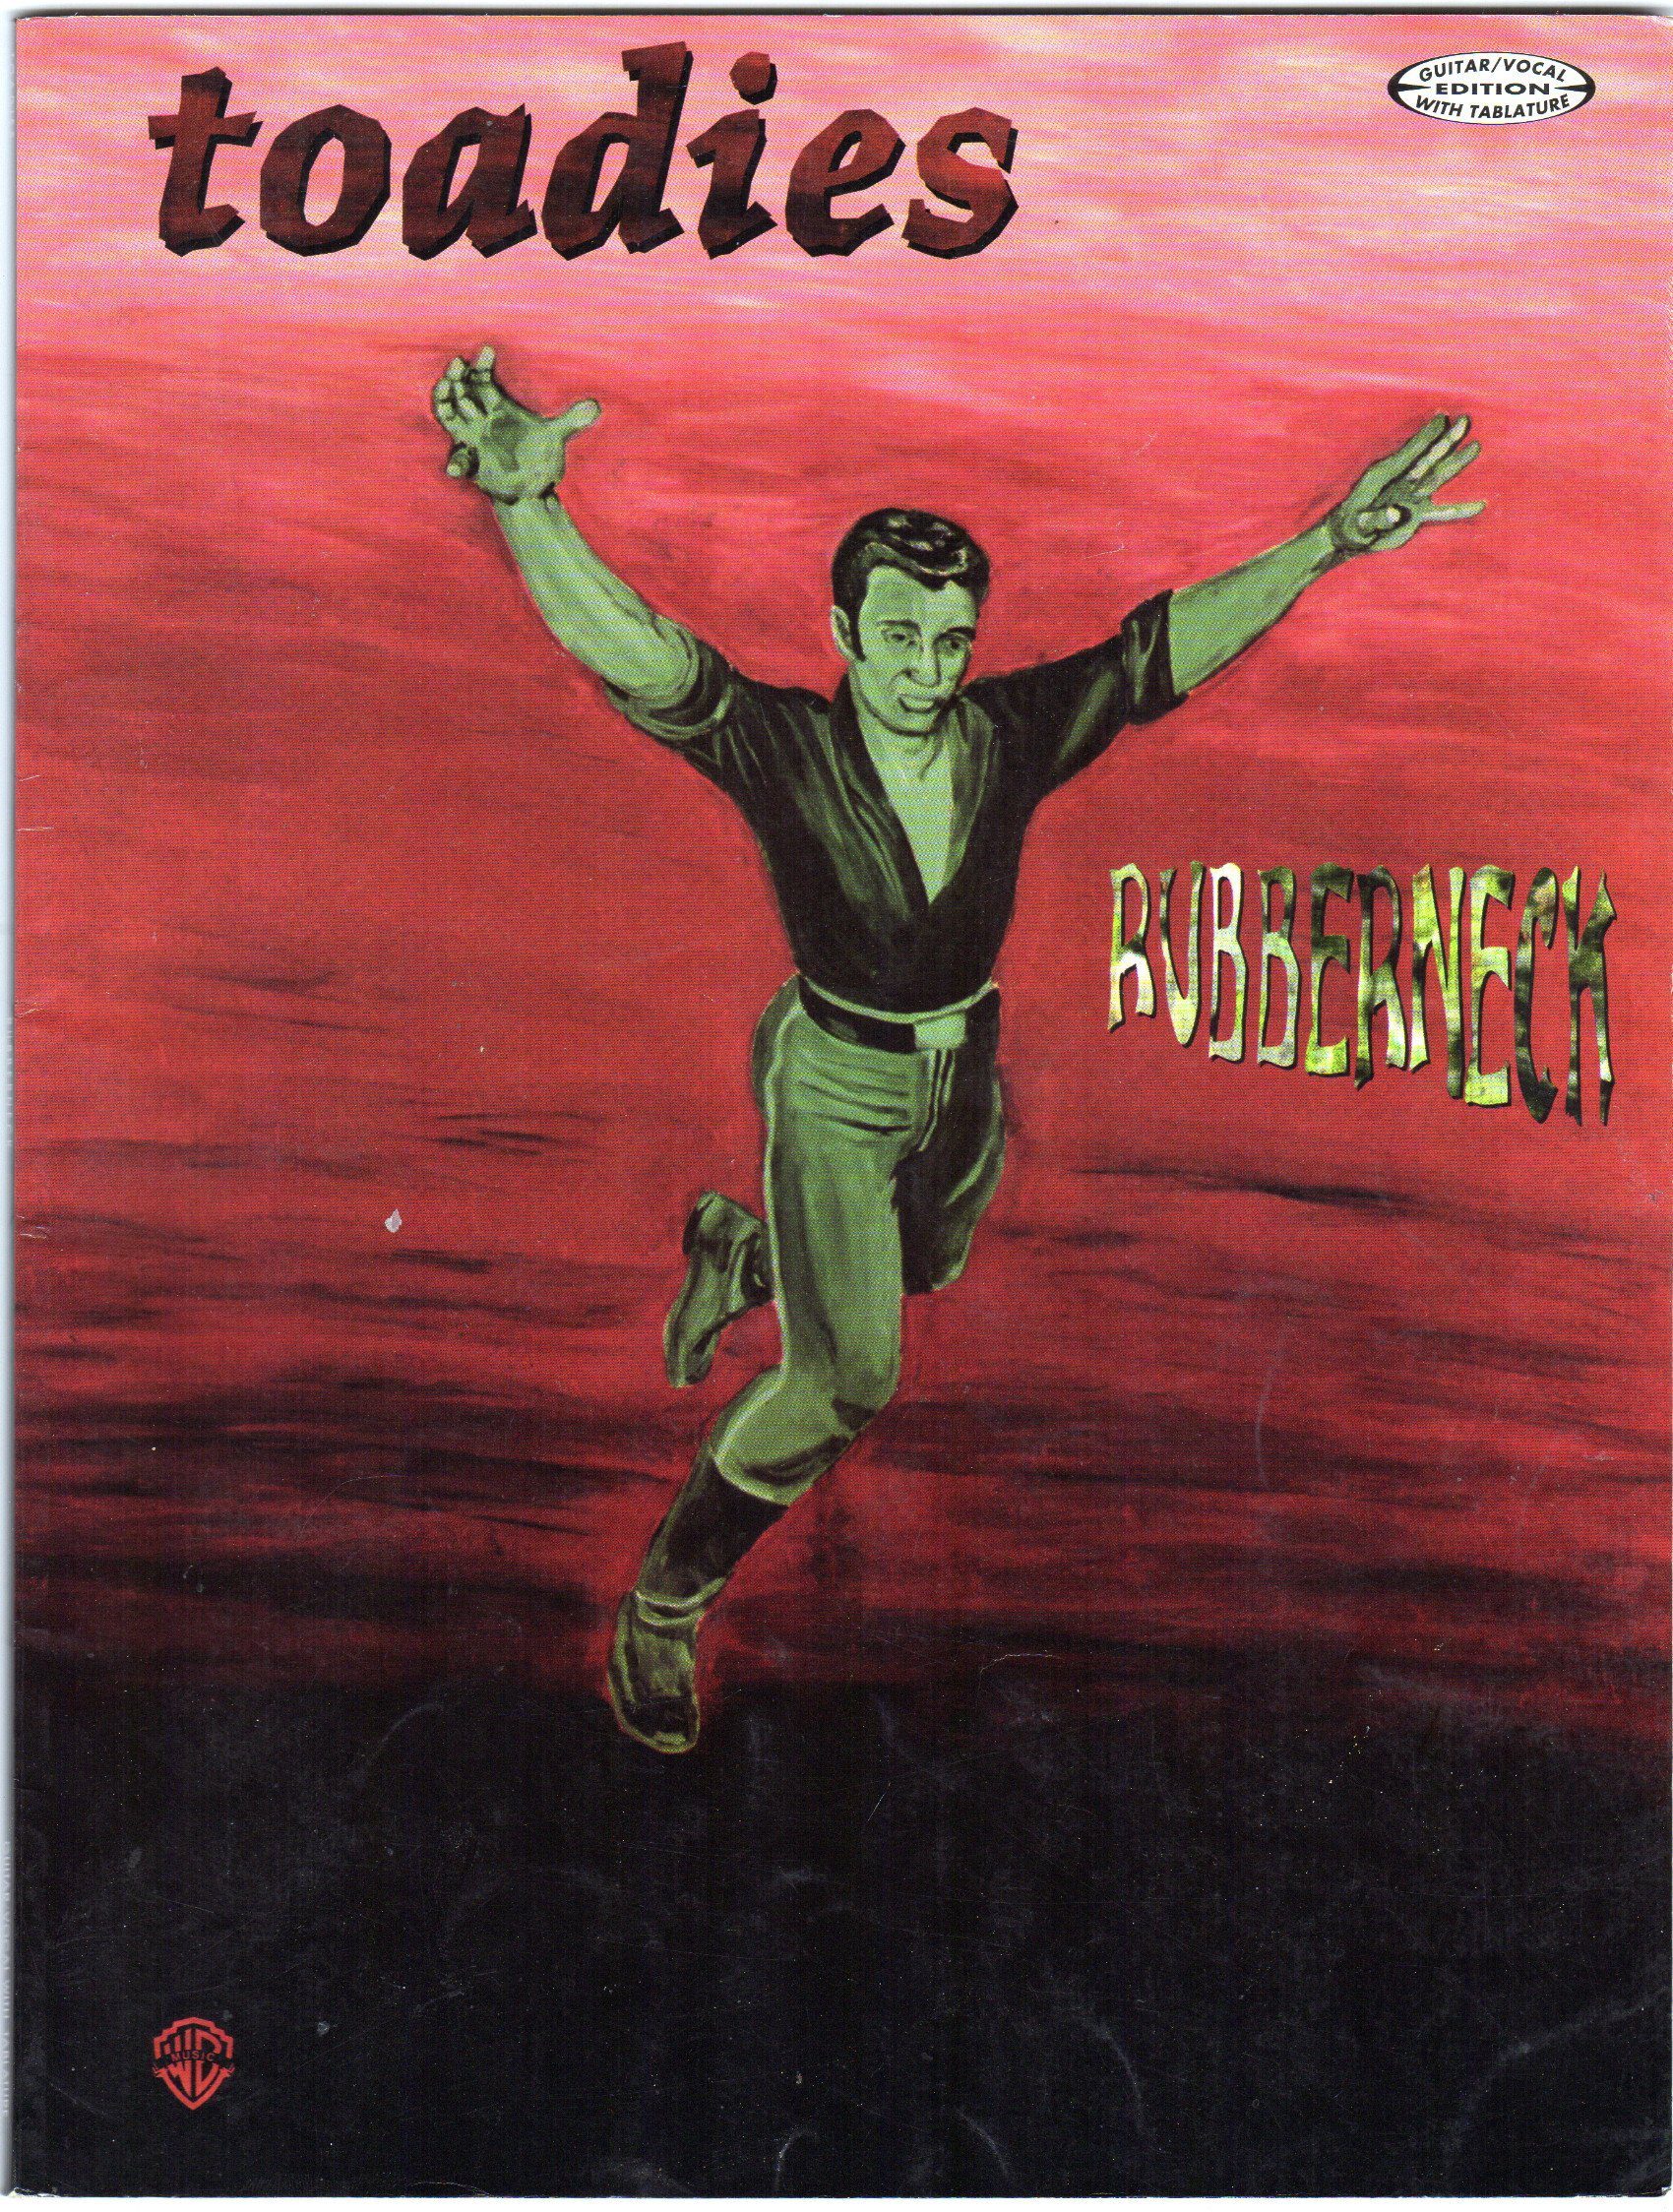 The Toadies Rubberneck album cover is the painting of a green-tinted man running or falling on a red background that may be an ocean.